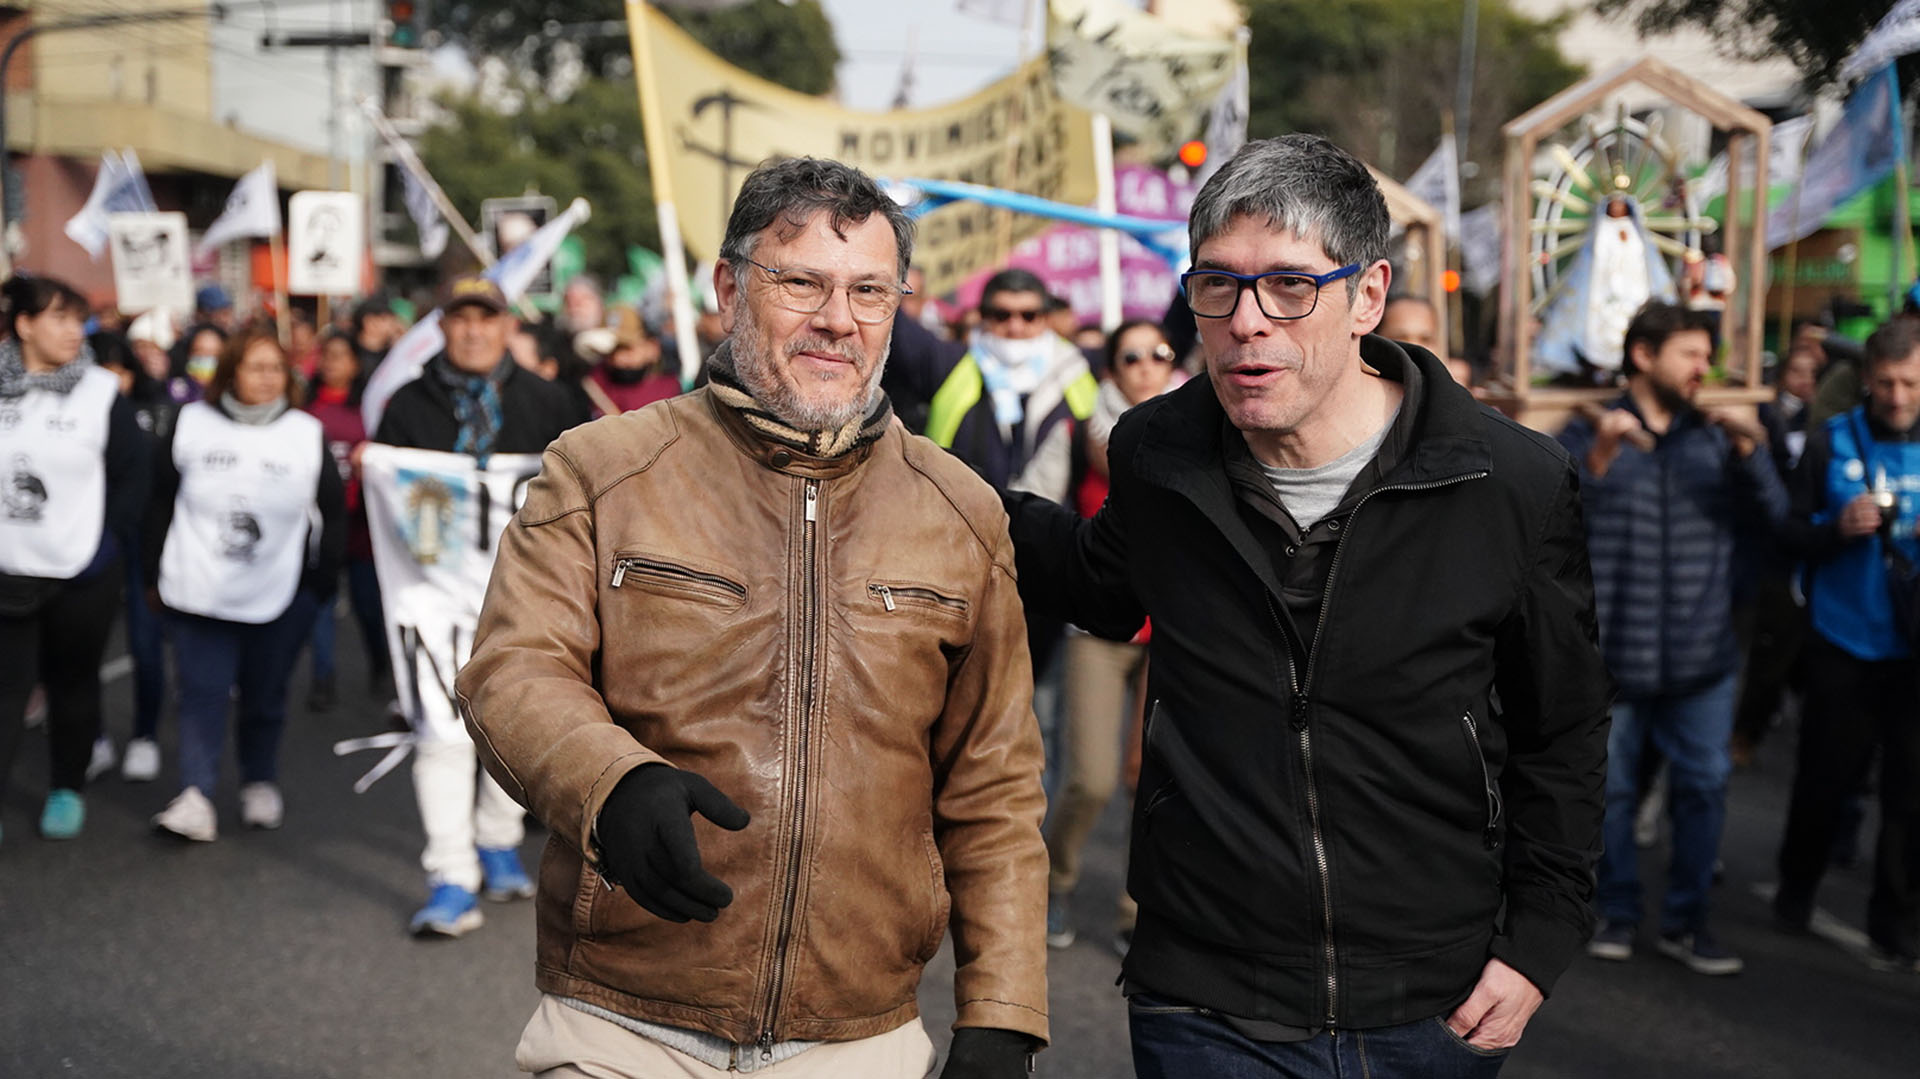 Juan Manuel Abal Medina, former head of the Cabinet of Ministers of Argentina (right) joined the social demonstration